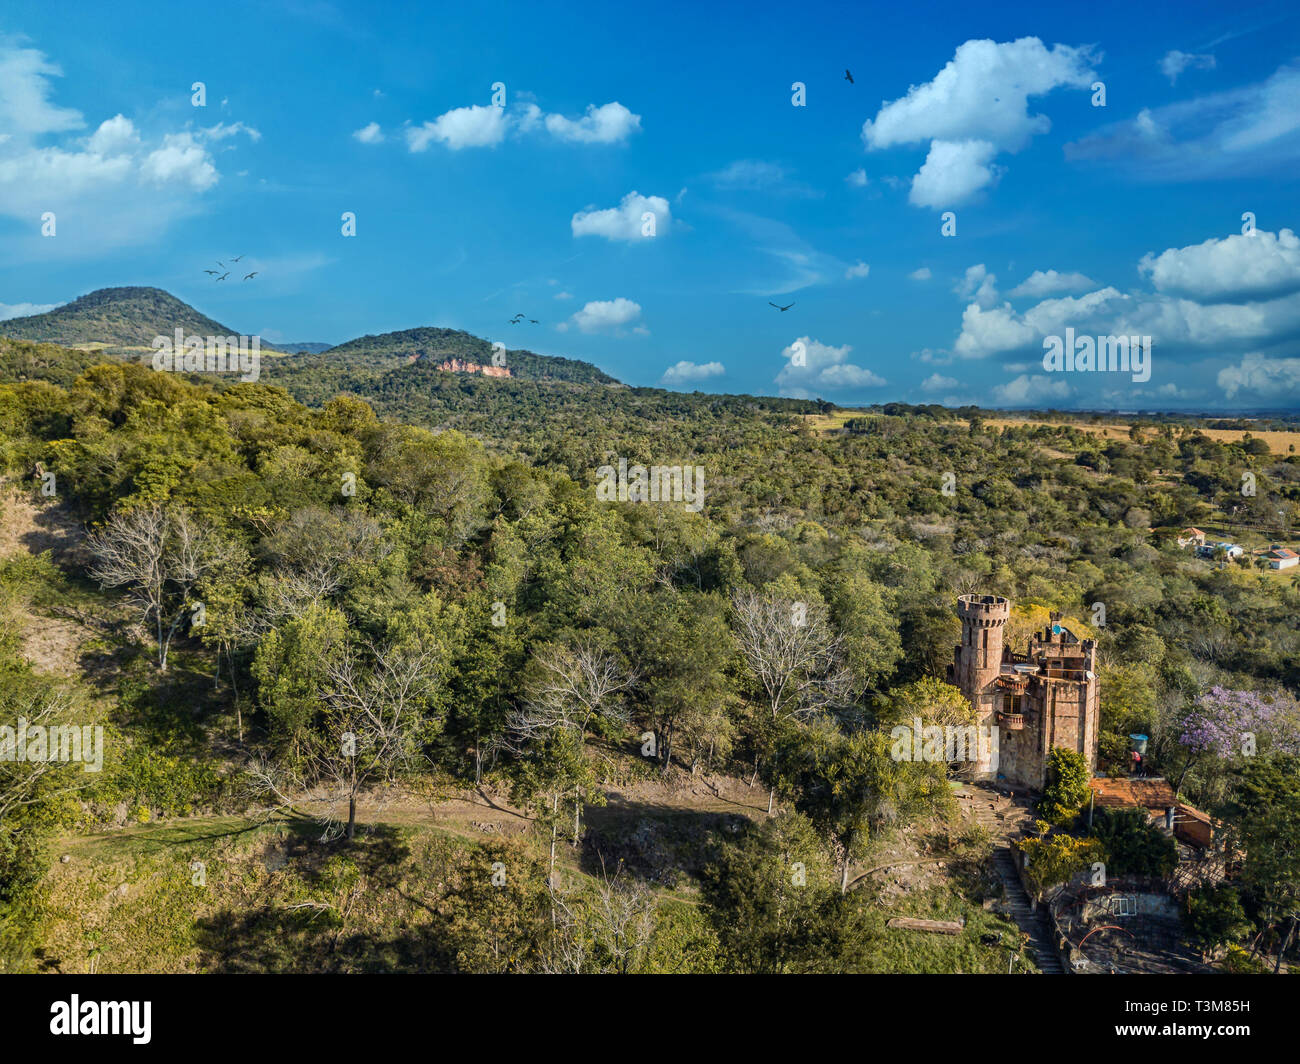 Aerial view of a castle in Paraguay overlooking the Ybytyruzu Mountains. Stock Photo